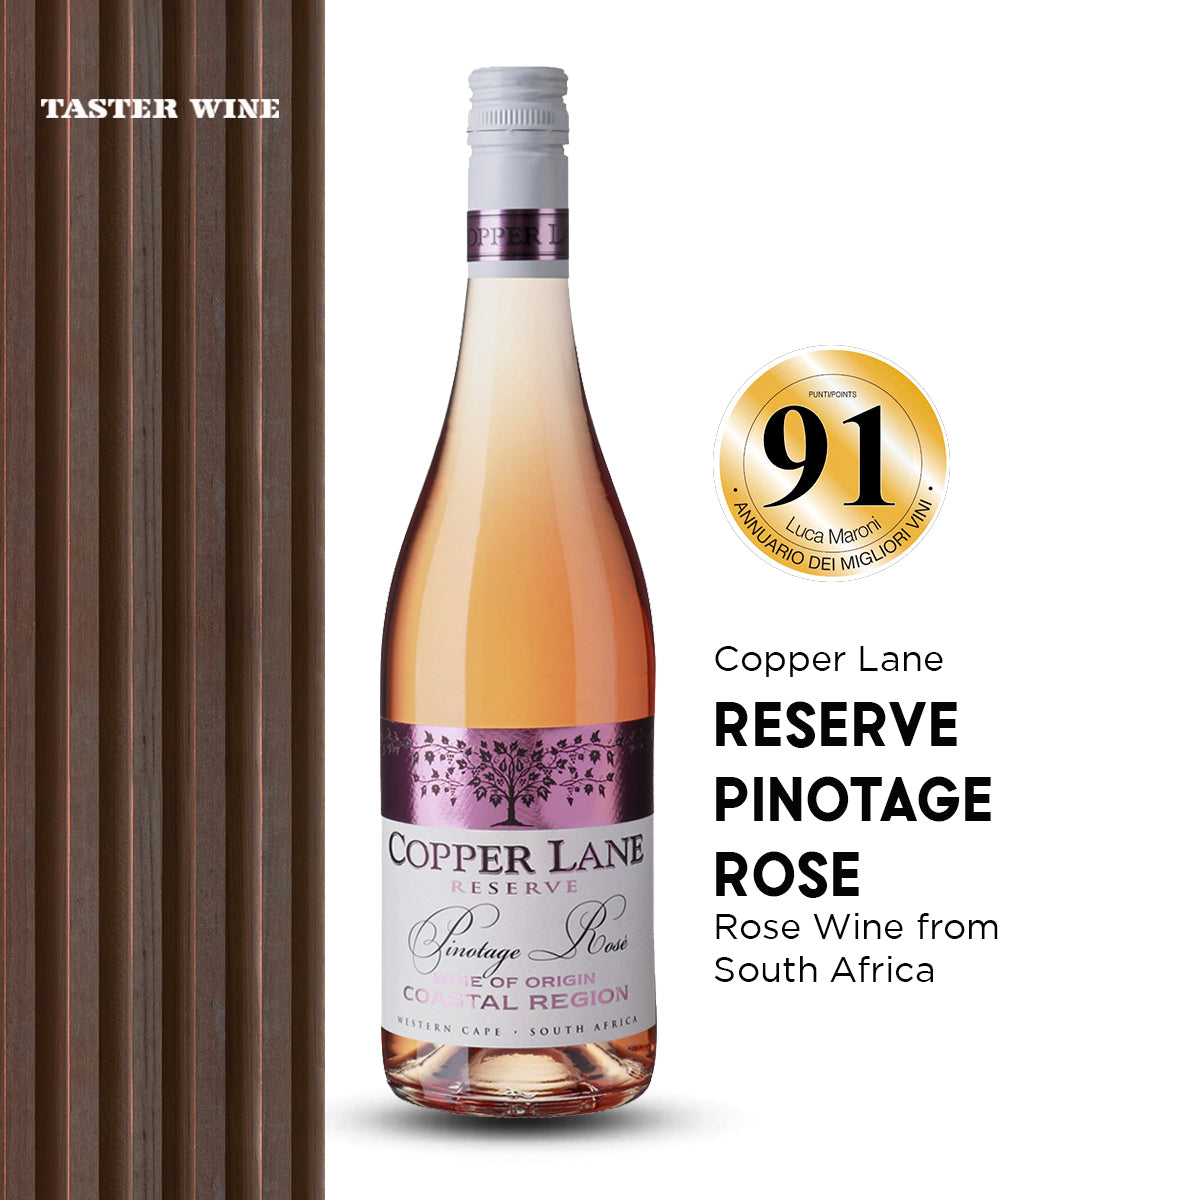 Copper Lane Reserve Pinotage Rose 2019 - Bloom Concept